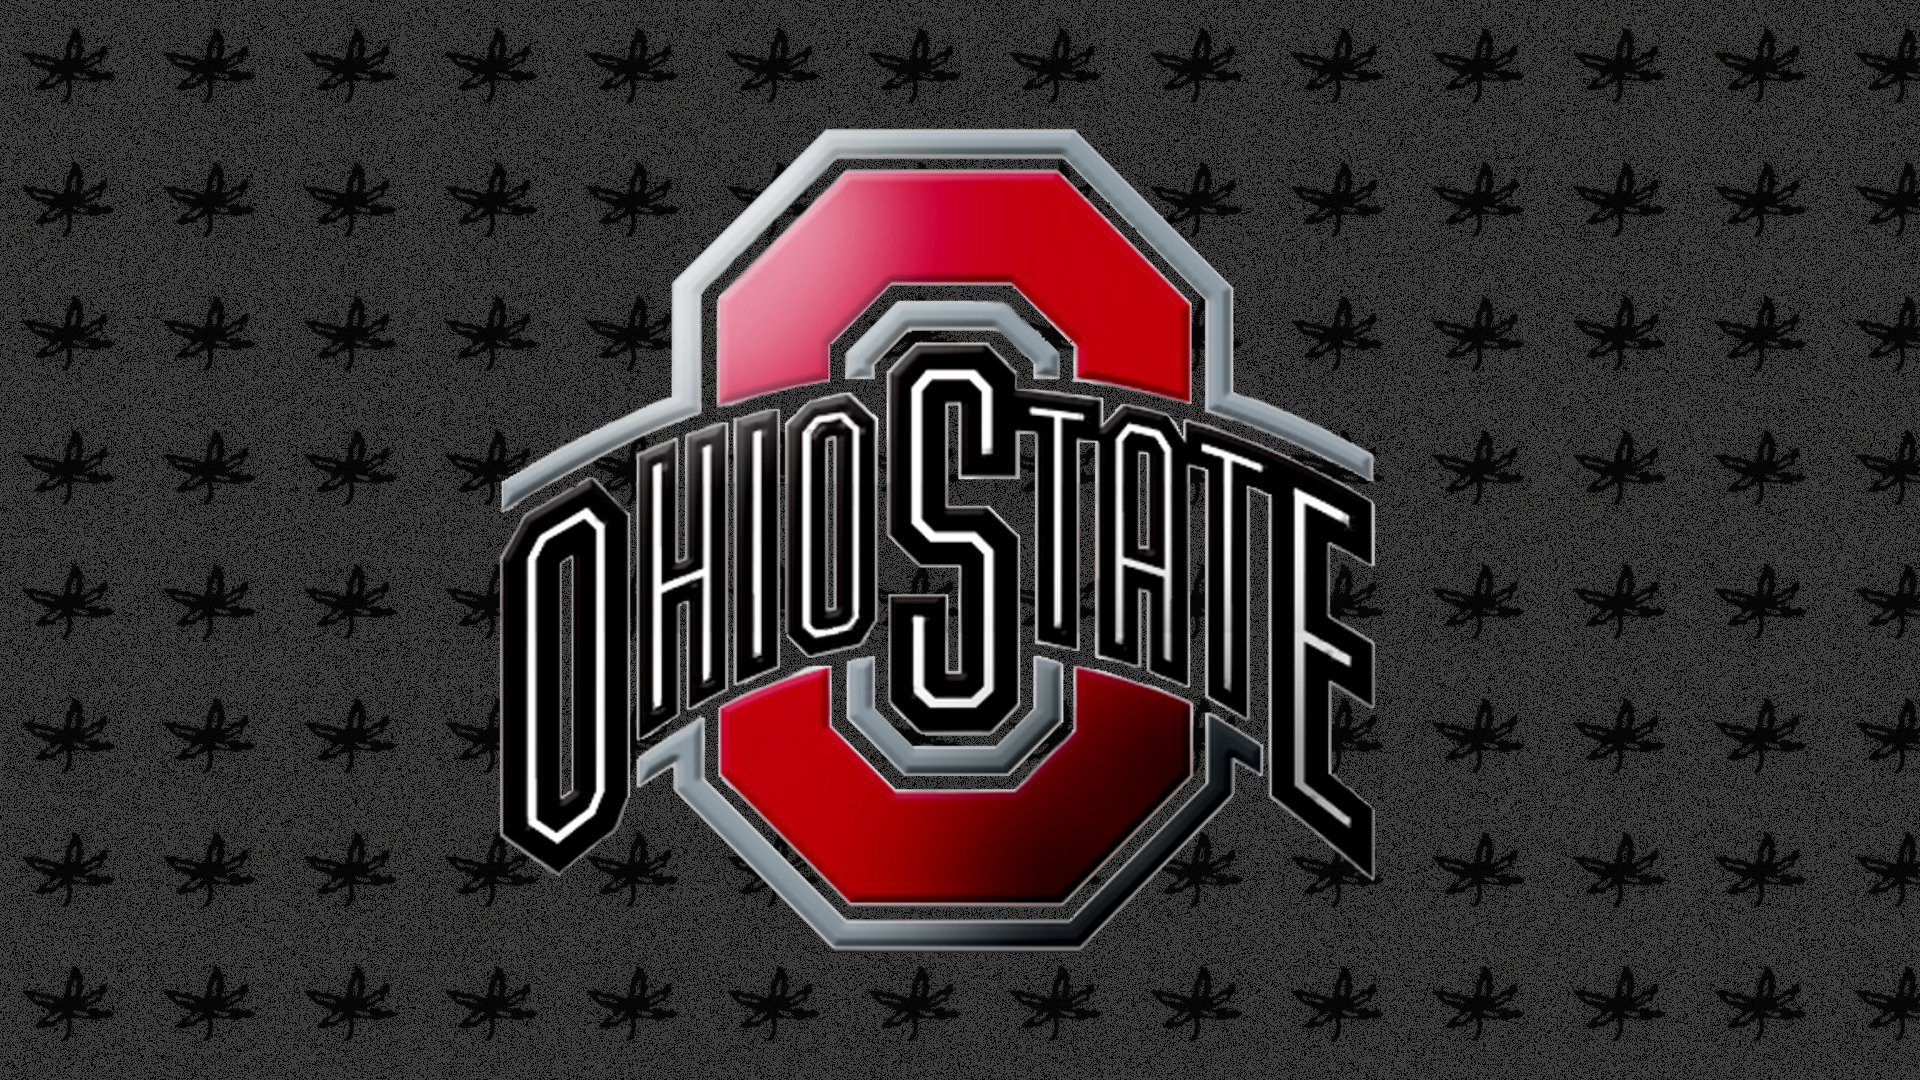 Browse Ohio State Wallpaper For iPhone HD Photo Collection